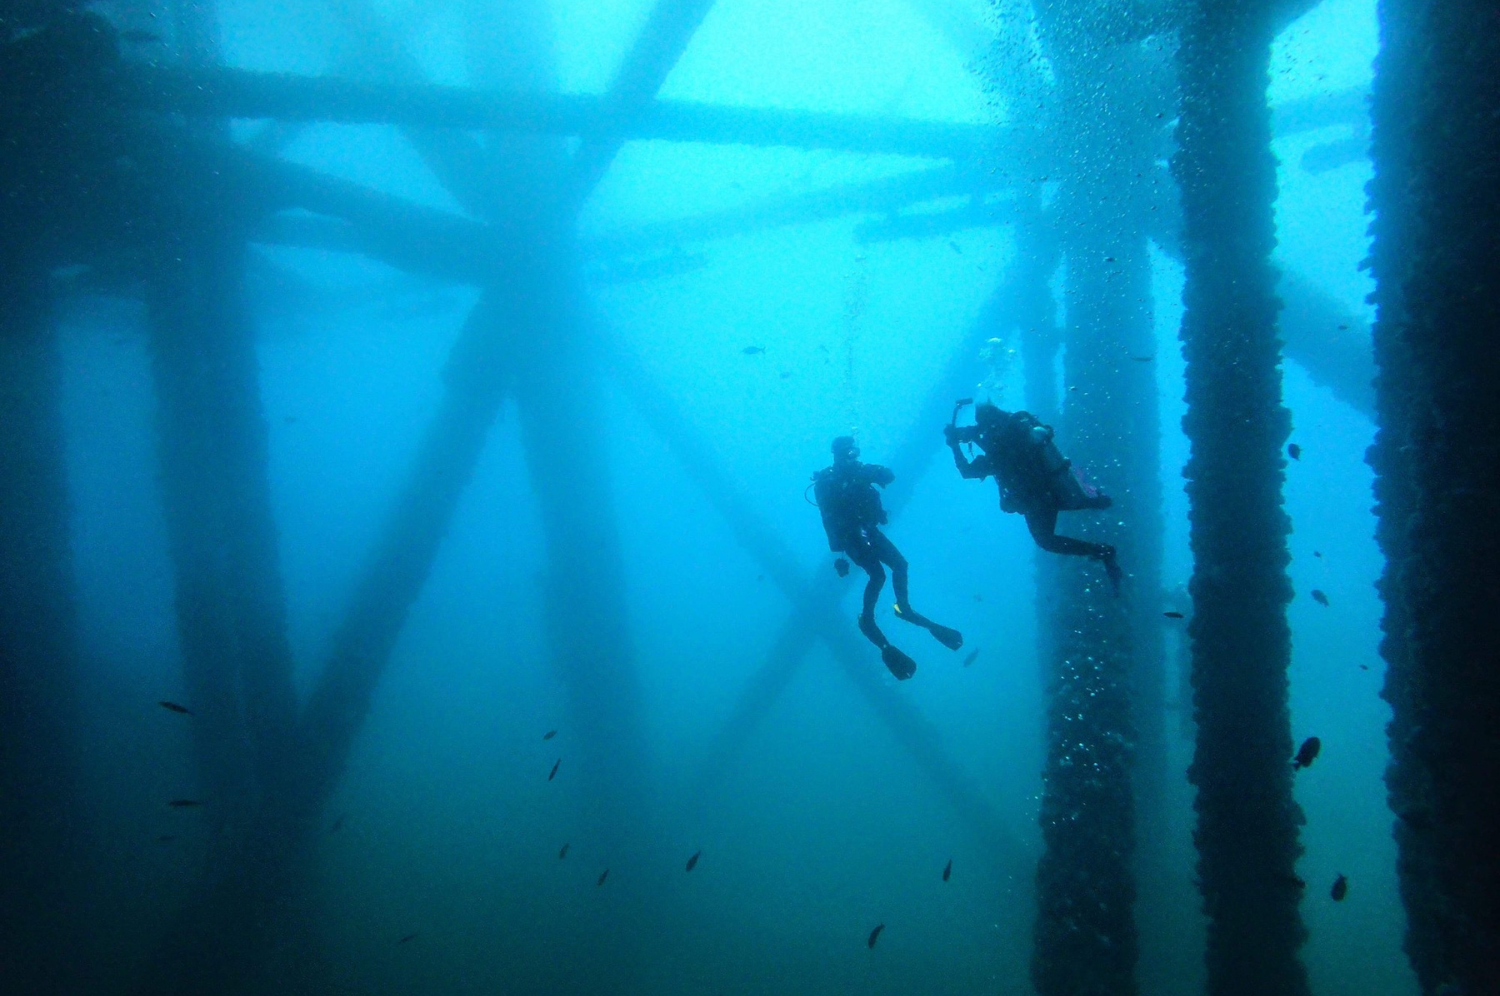 Underwater image of divers exploring some oil rigs.